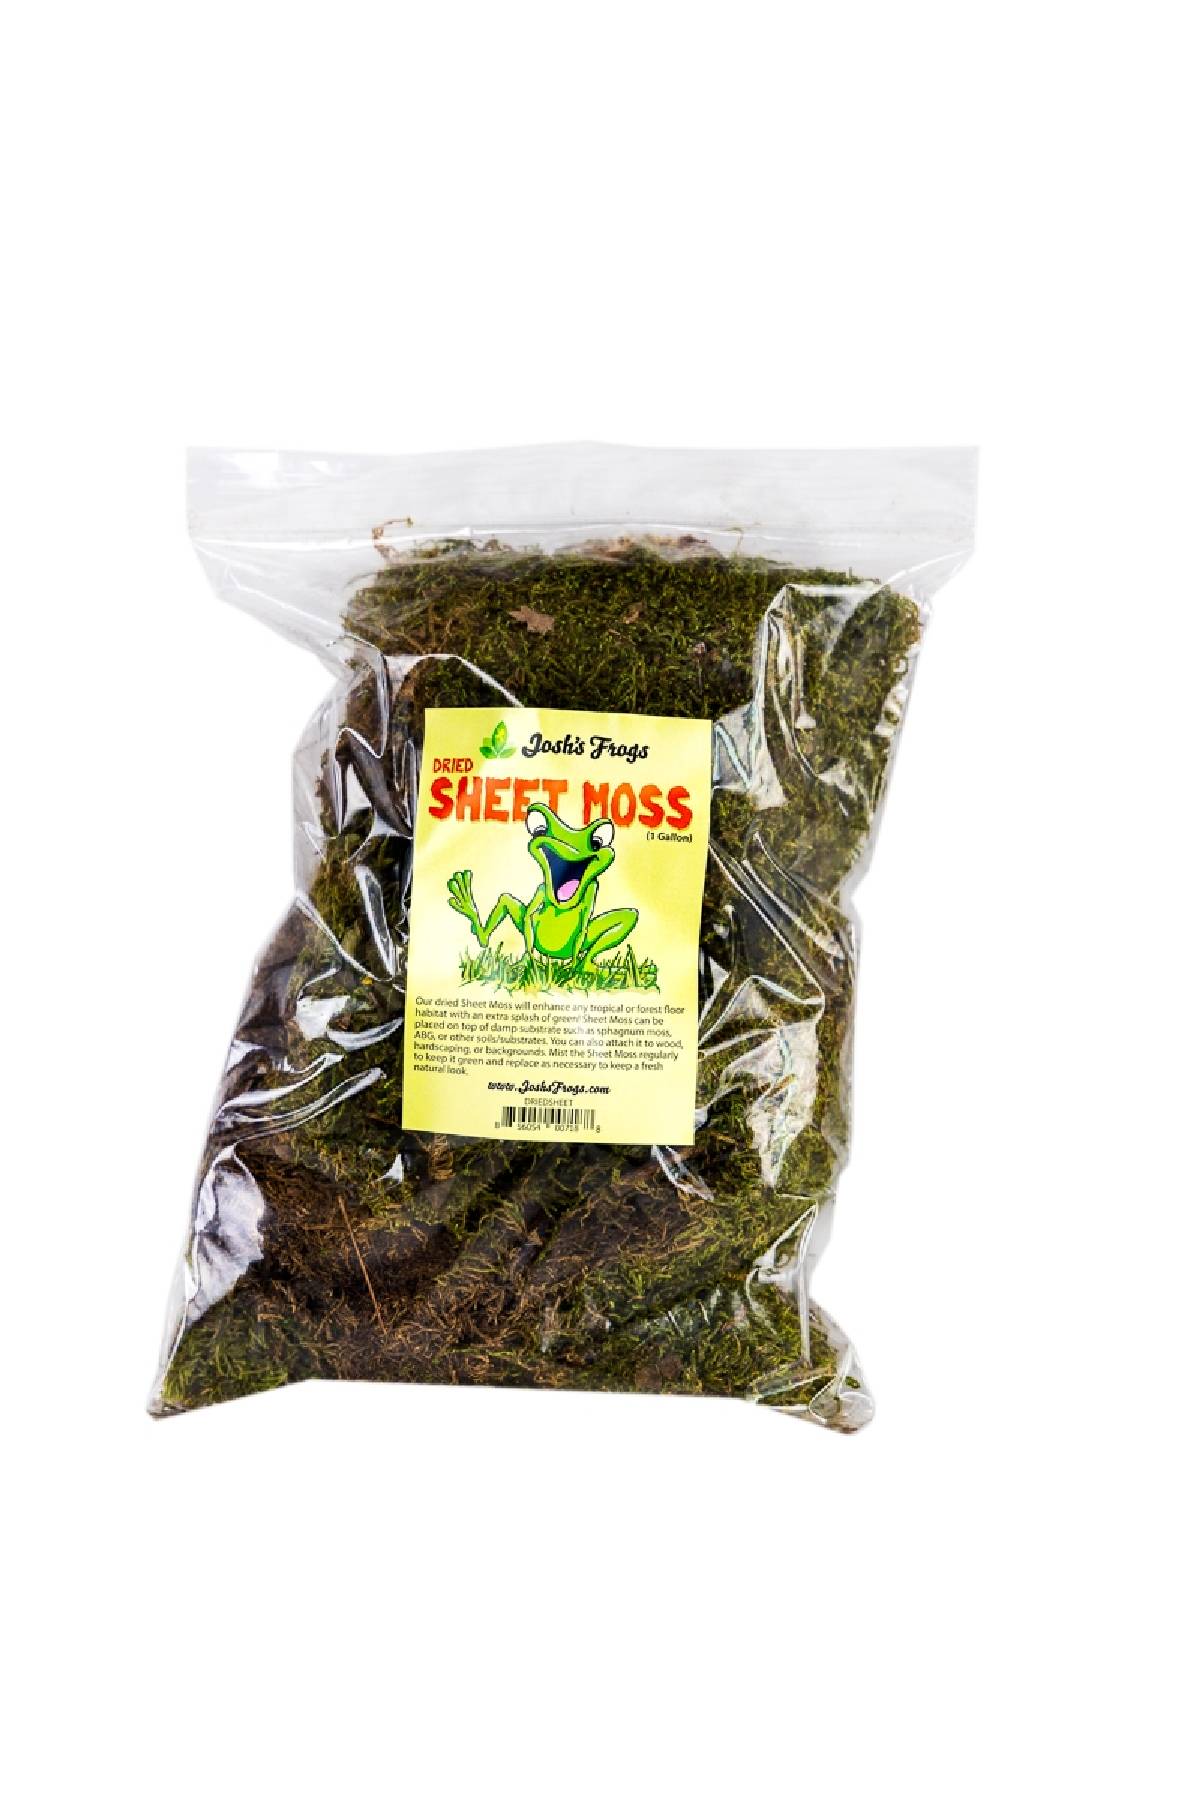 Live Moss Scraps for Transplant or Use Between Patio Stones Feather Sheet 1  Gallon Bag